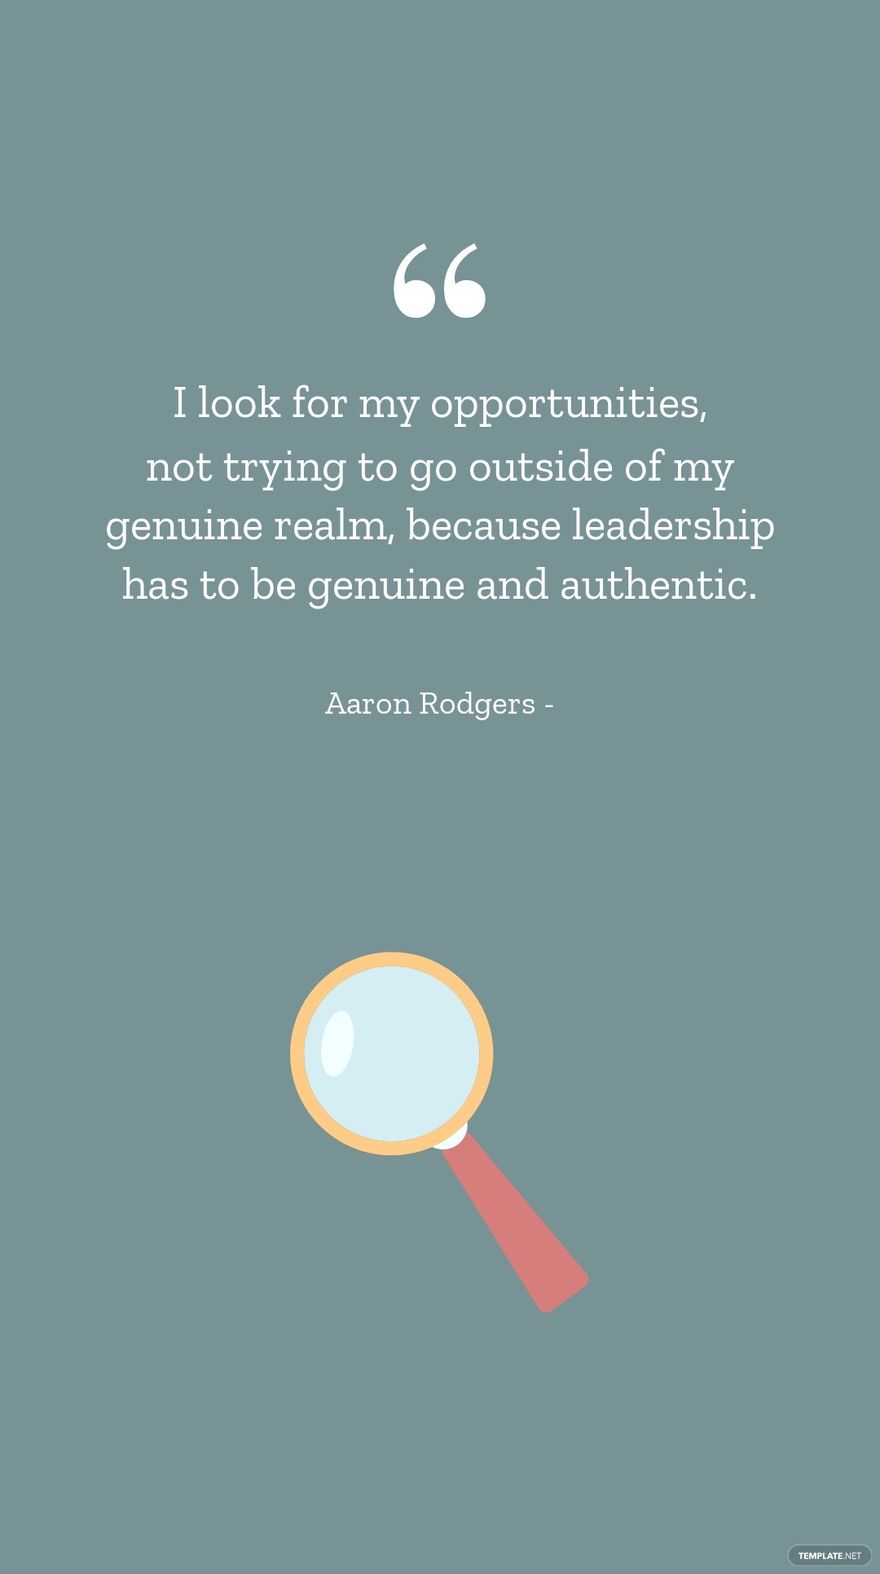 Aaron Rodgers - I look for my opportunities, not trying to go outside of my genuine realm, because leadership has to be genuine and authentic. in JPG